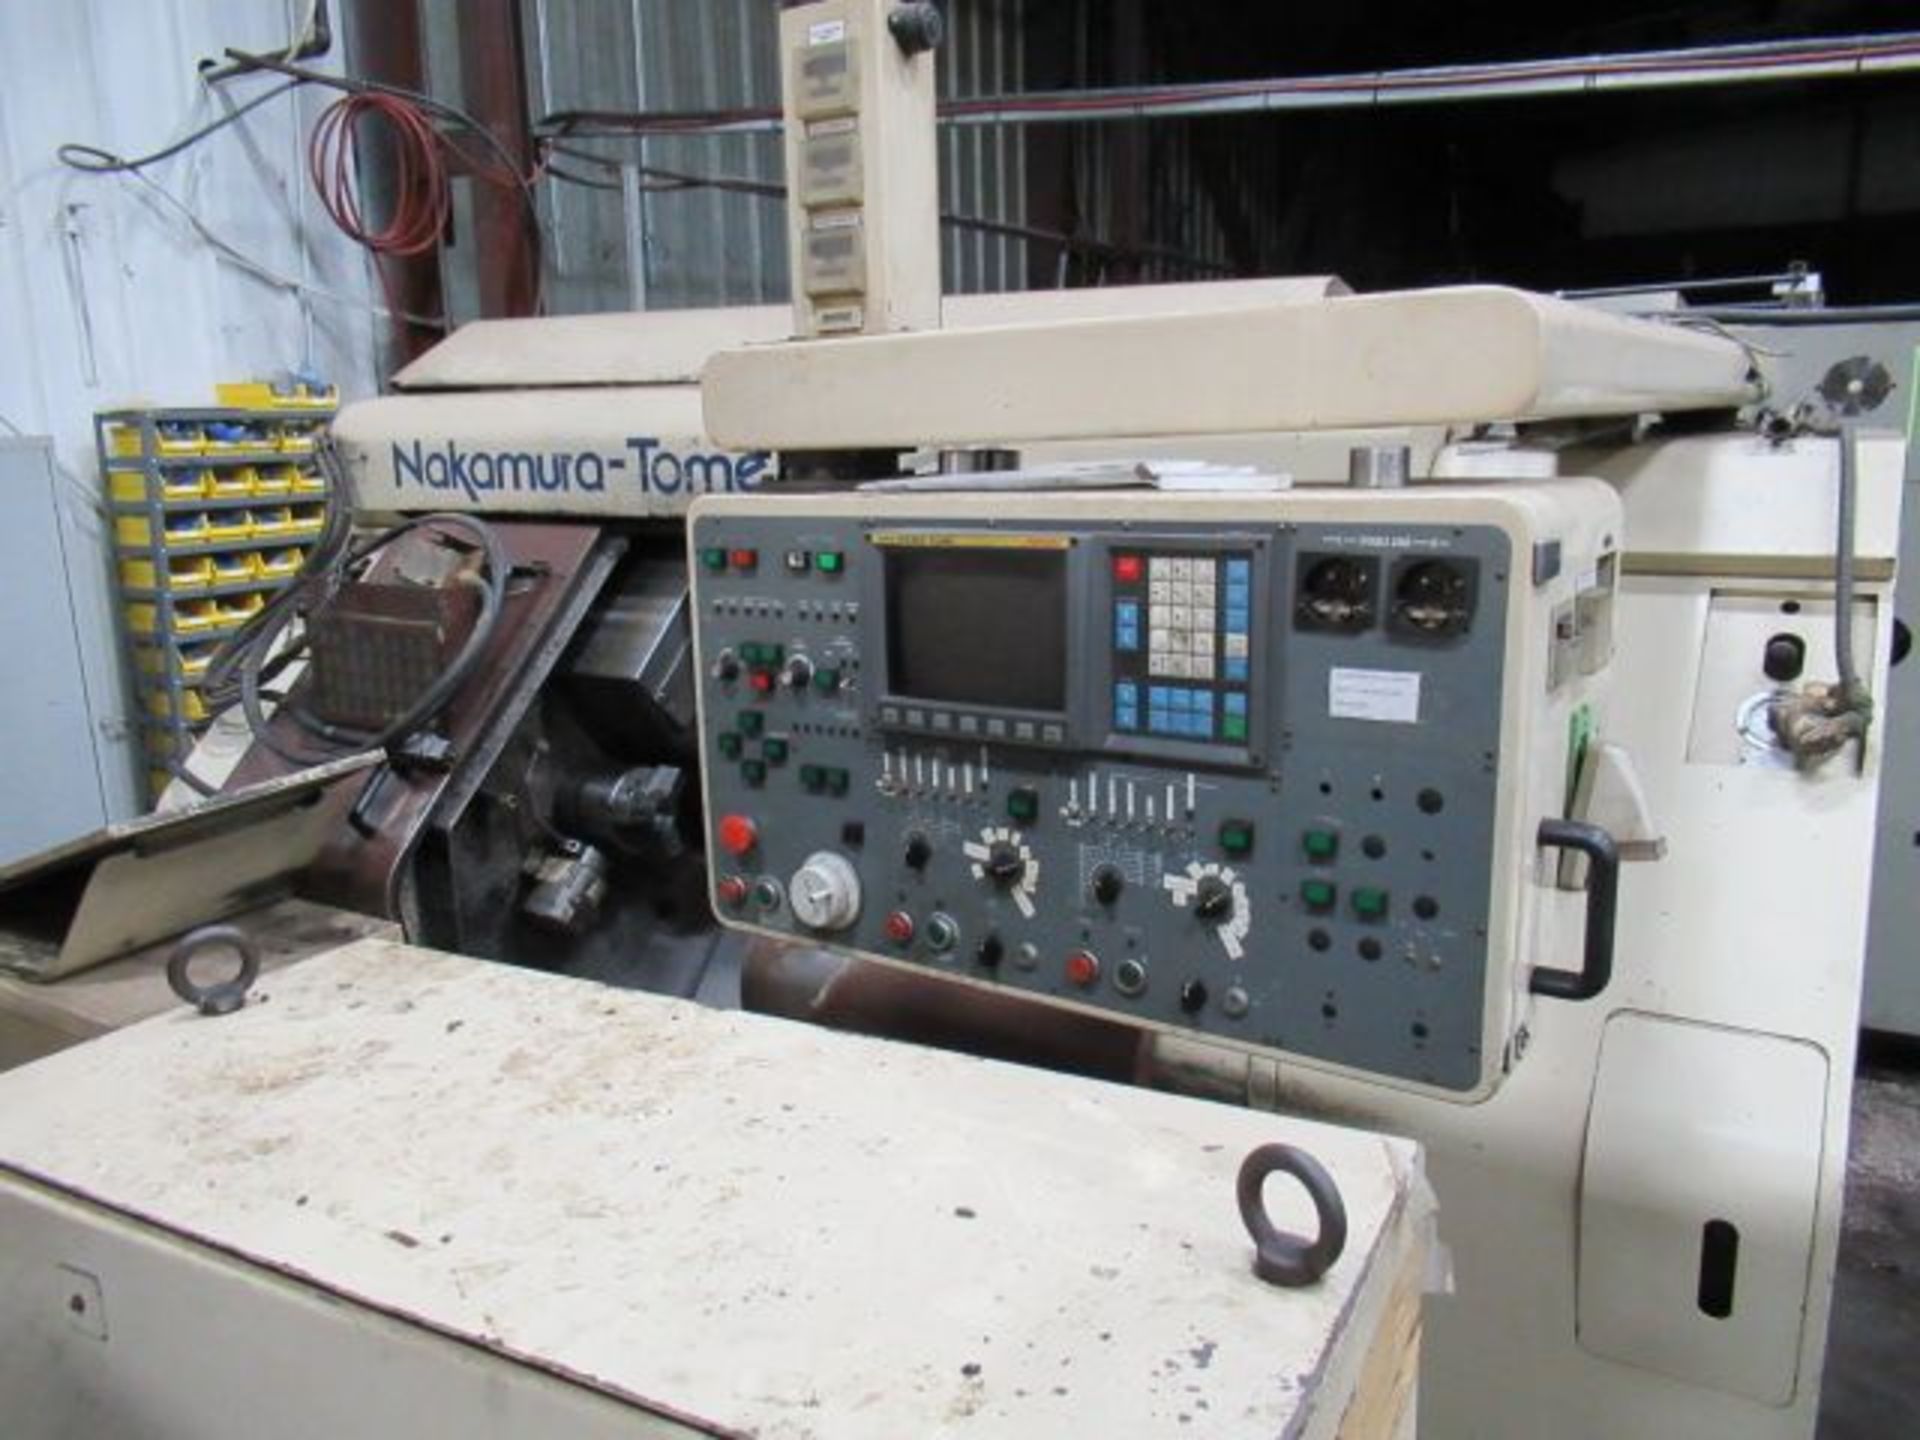 NAKAMURA TOME TW20 CNC Turning Center, M/N TW20, s/n 20206 ($1200 Rigging Cost) - Image 2 of 5